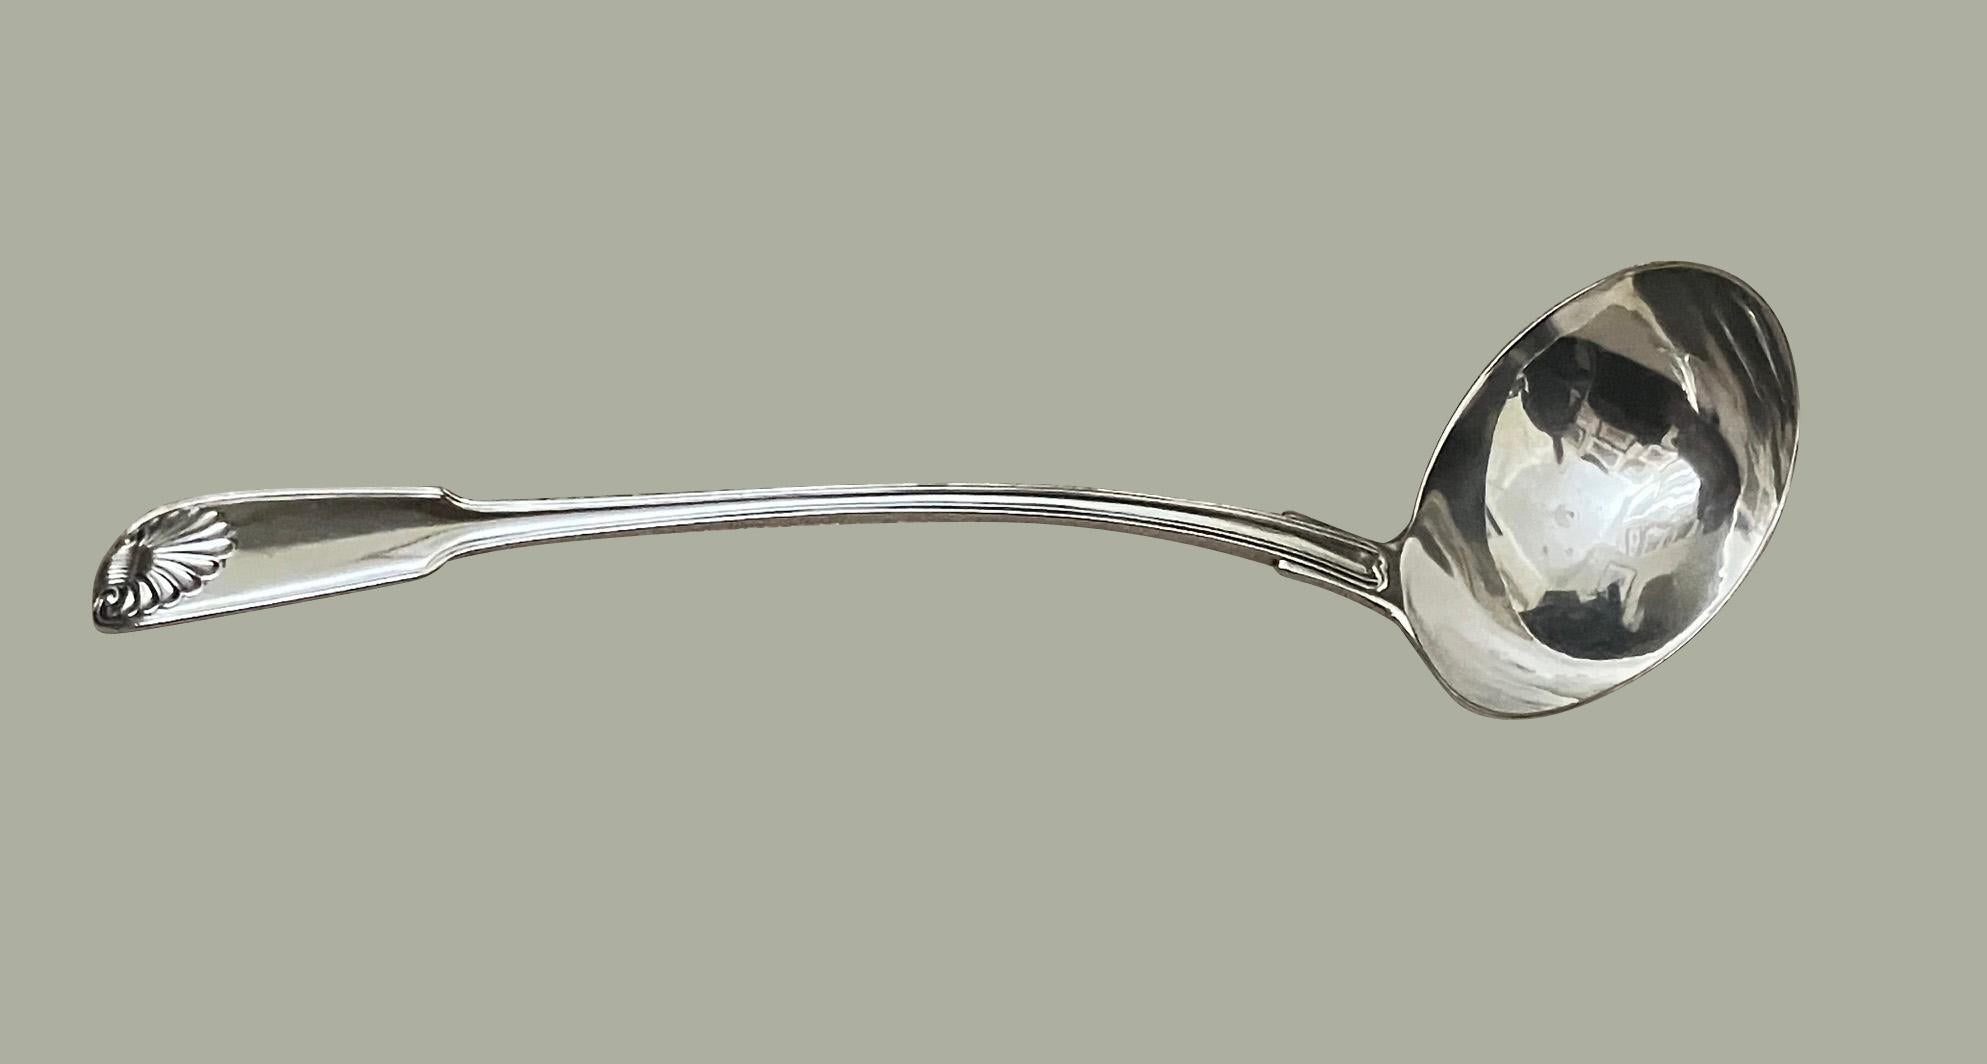 A fine English sterling silver ladle fully hallmarked for London date stamped for 1817 and made by Paul Storr (1771-1844) one of the two most famous English silversmith of his time. The ladle weighs 274 grams and is in the Fiddle and Shell pattern.